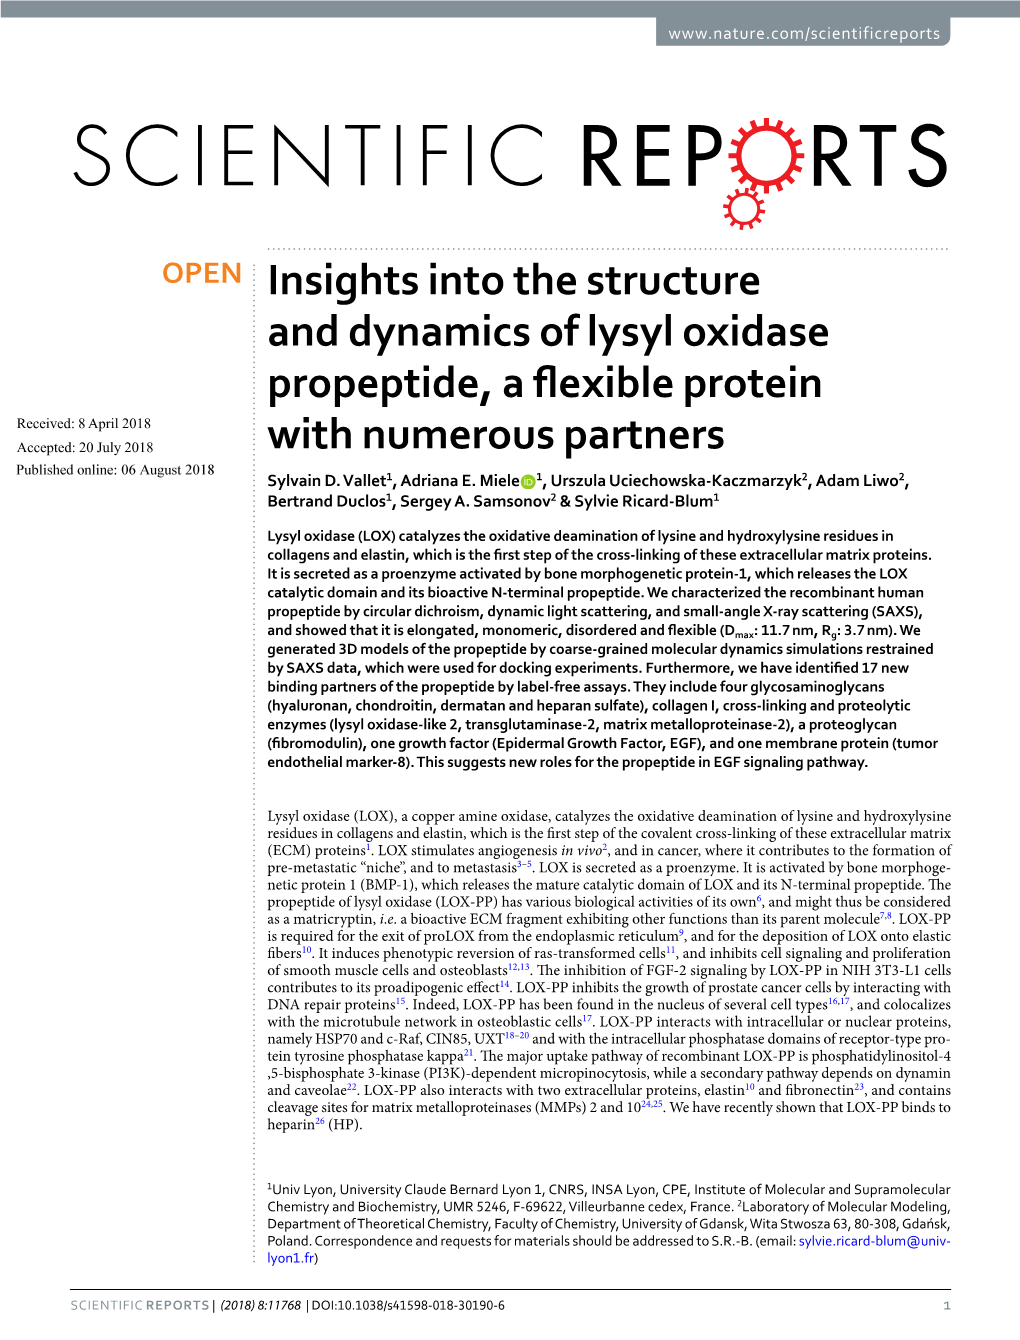 Insights Into the Structure and Dynamics of Lysyl Oxidase